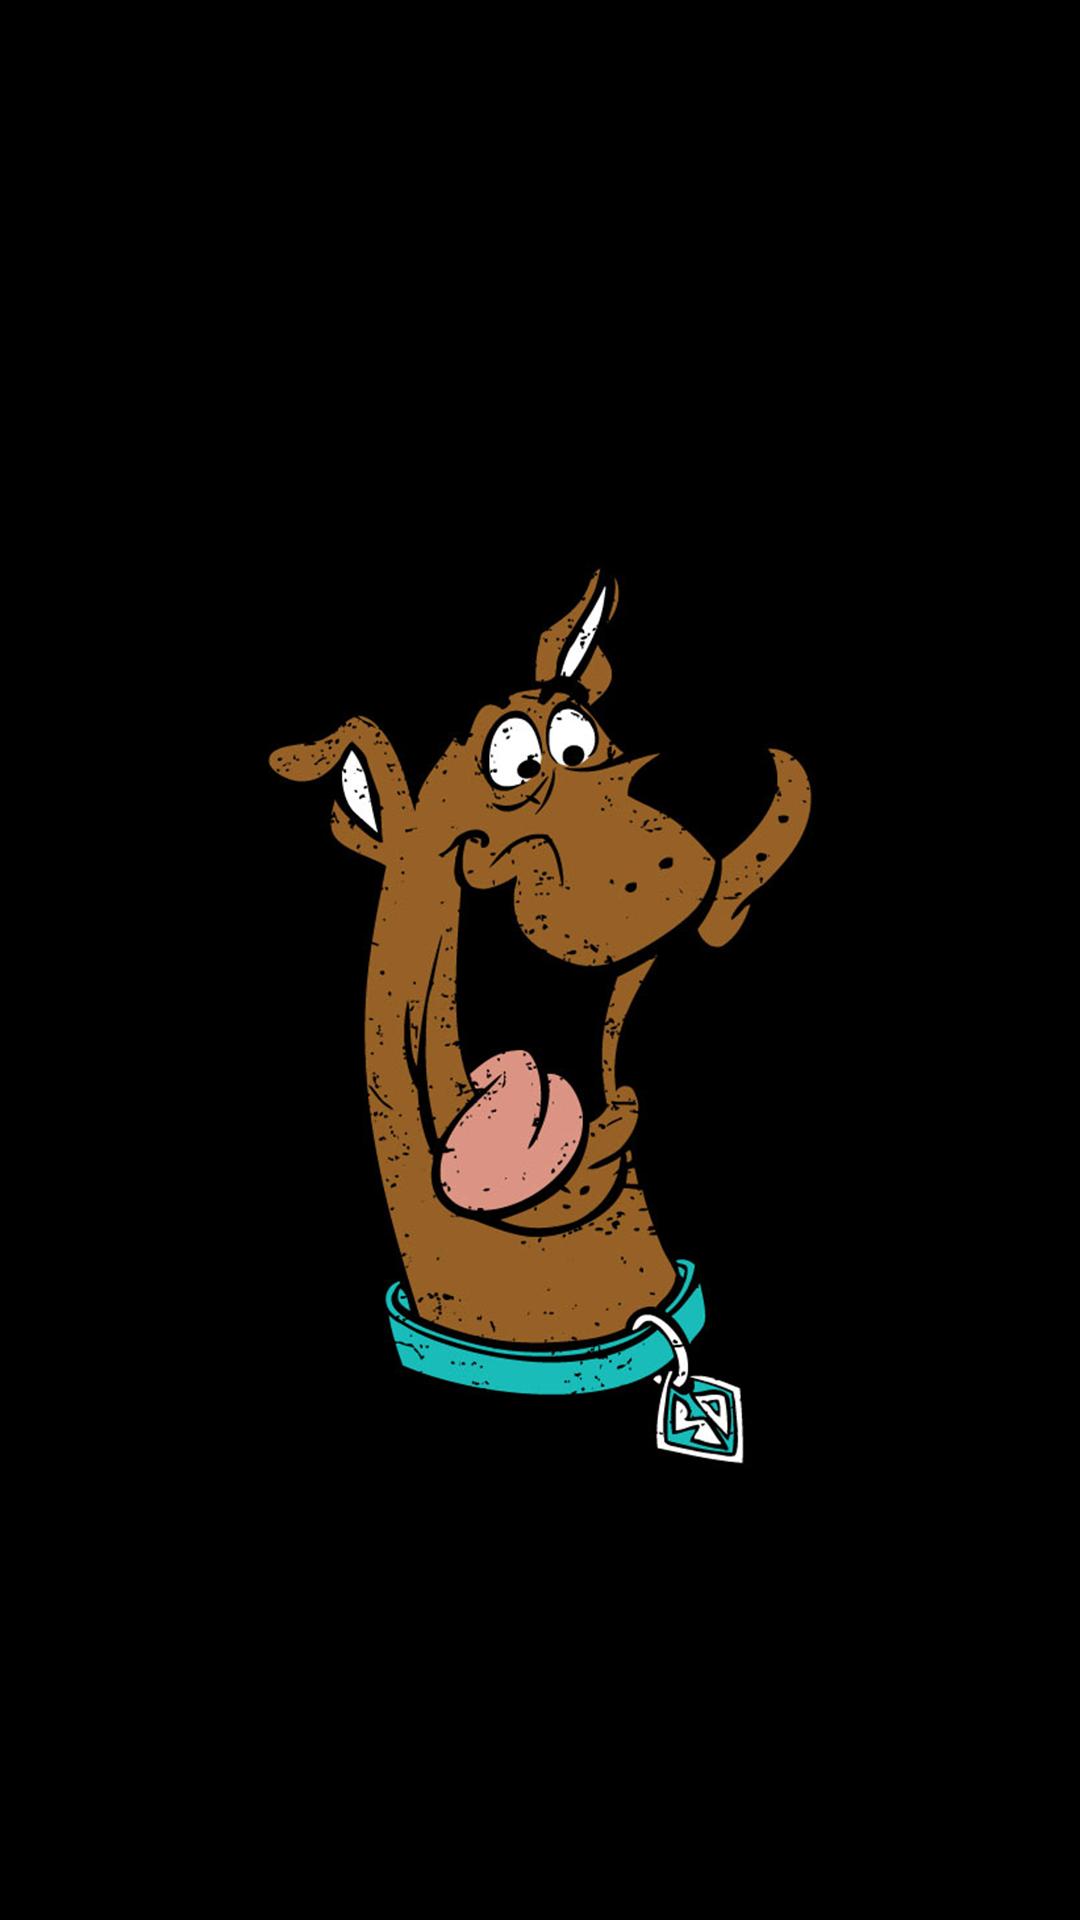 Scooby Doo HD Wallpaper For Android Apk